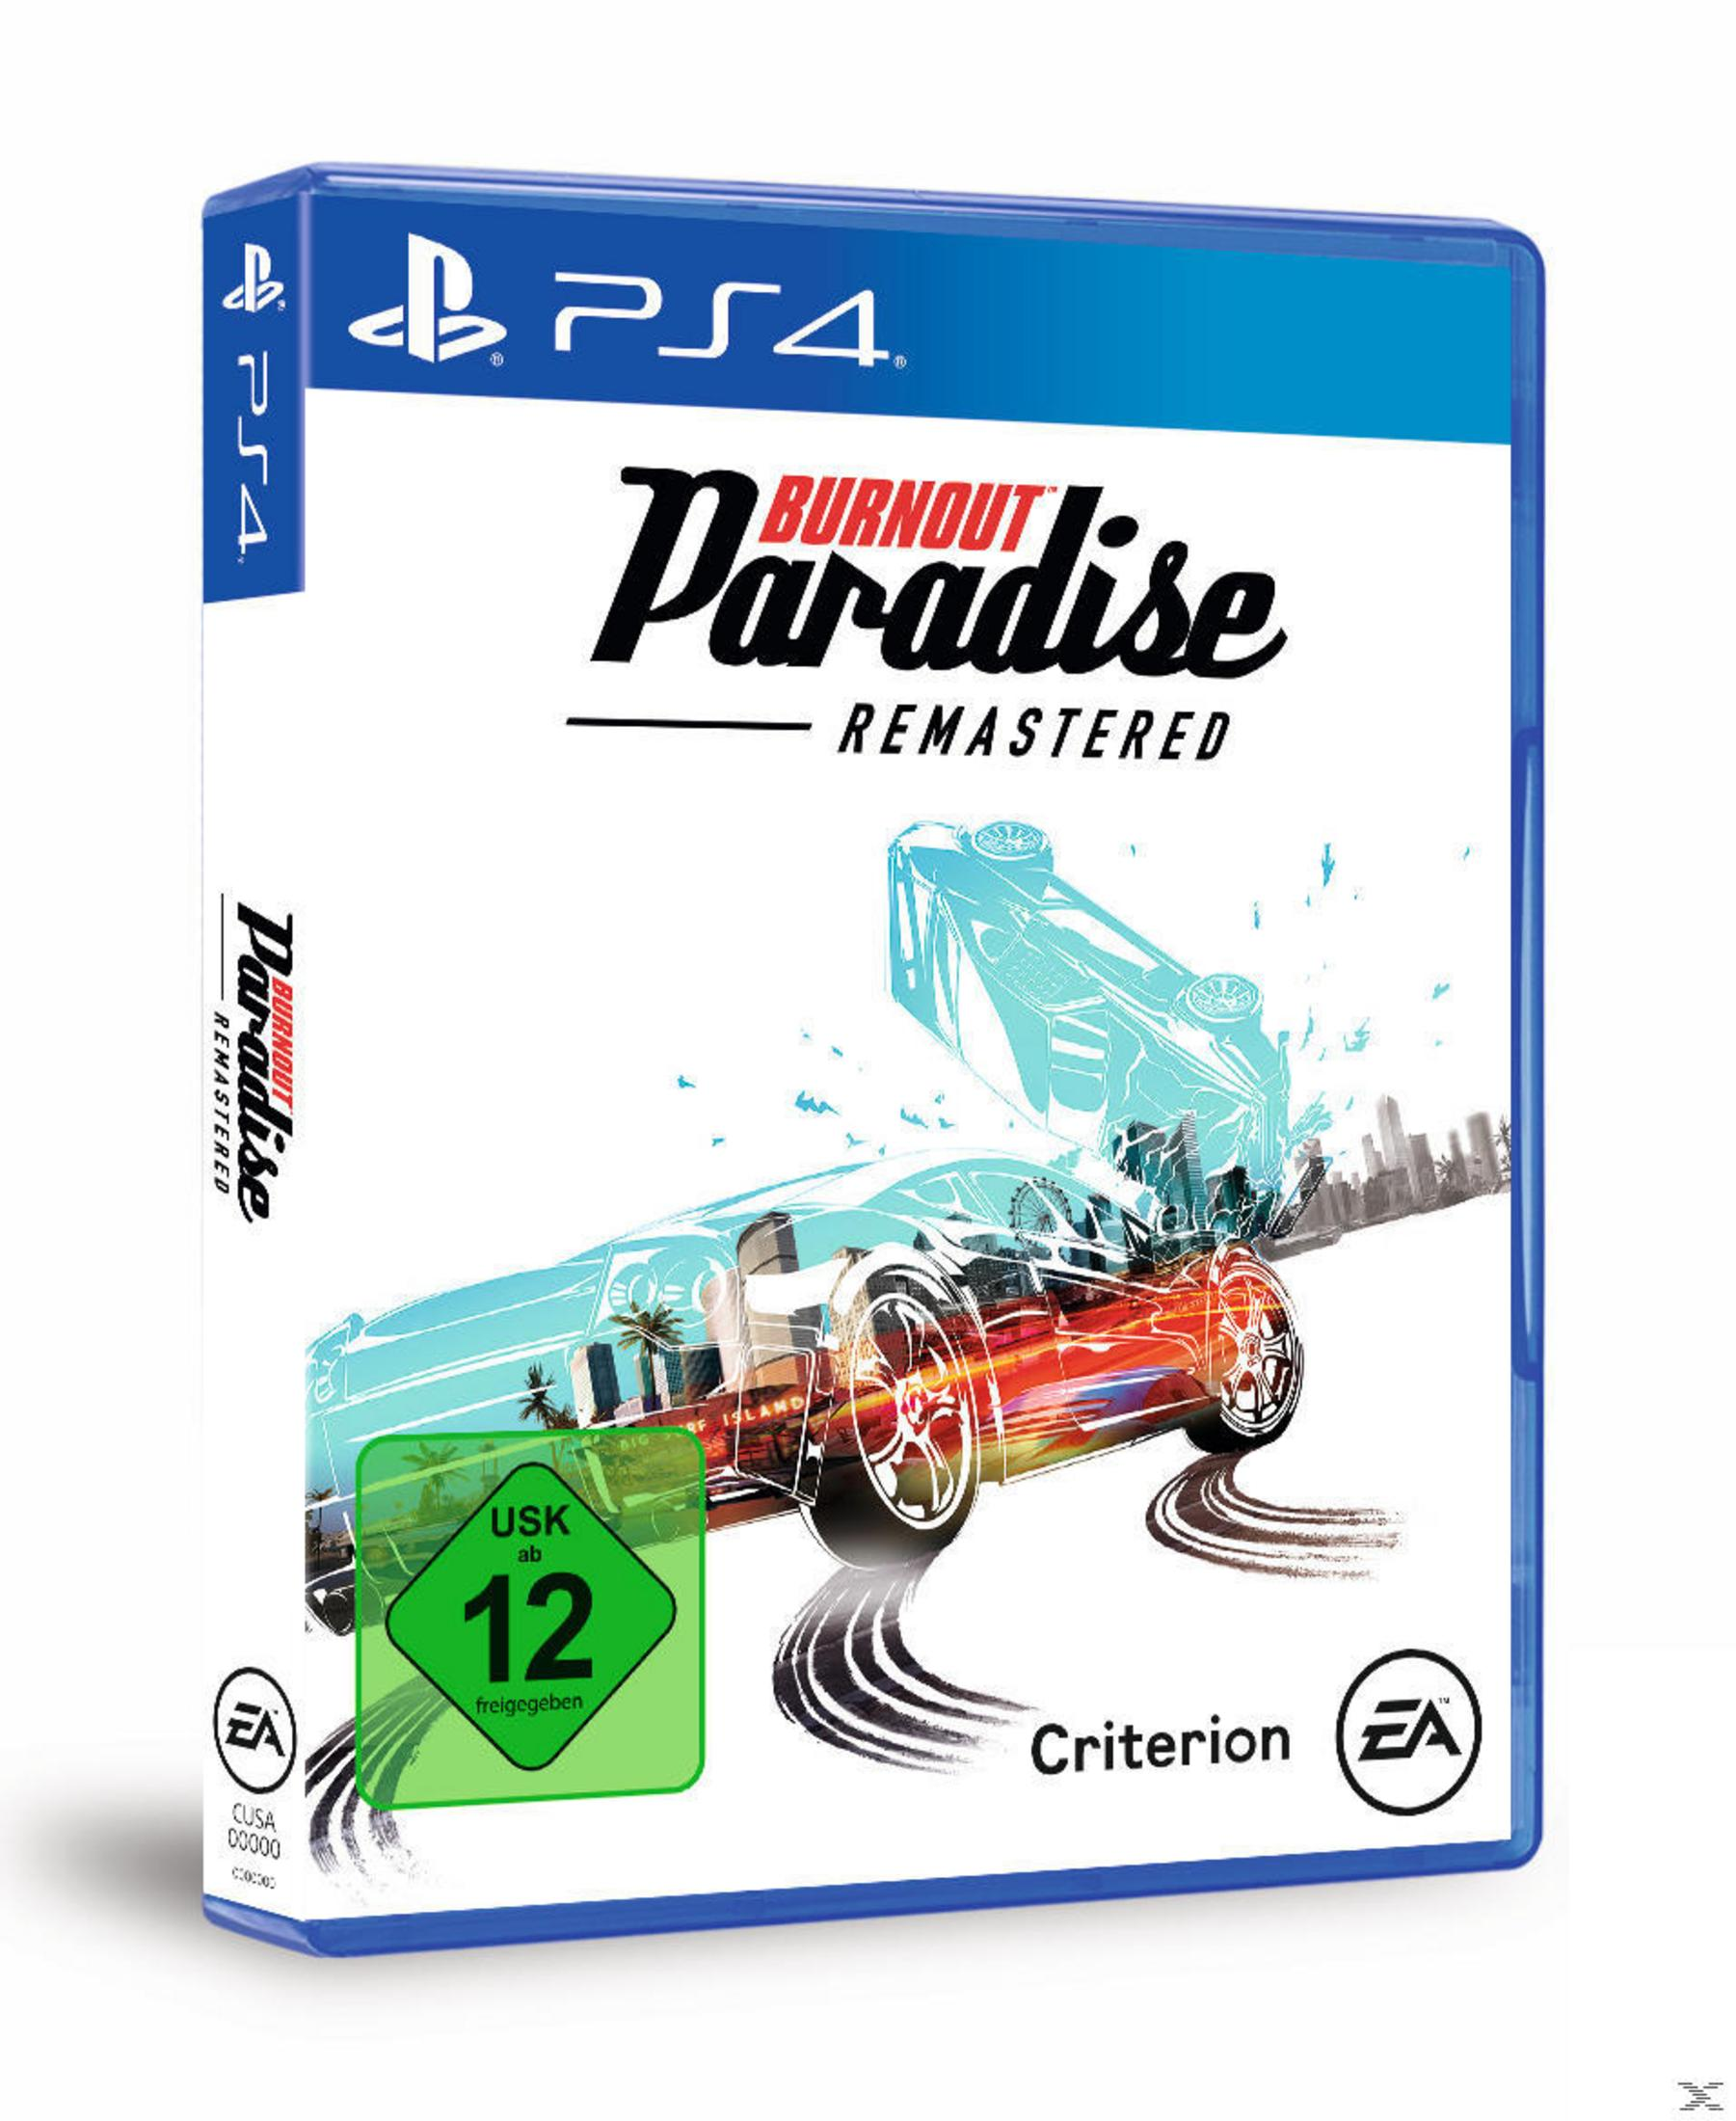 Burnout Paradise PS-4 Remastered 4] - [PlayStation